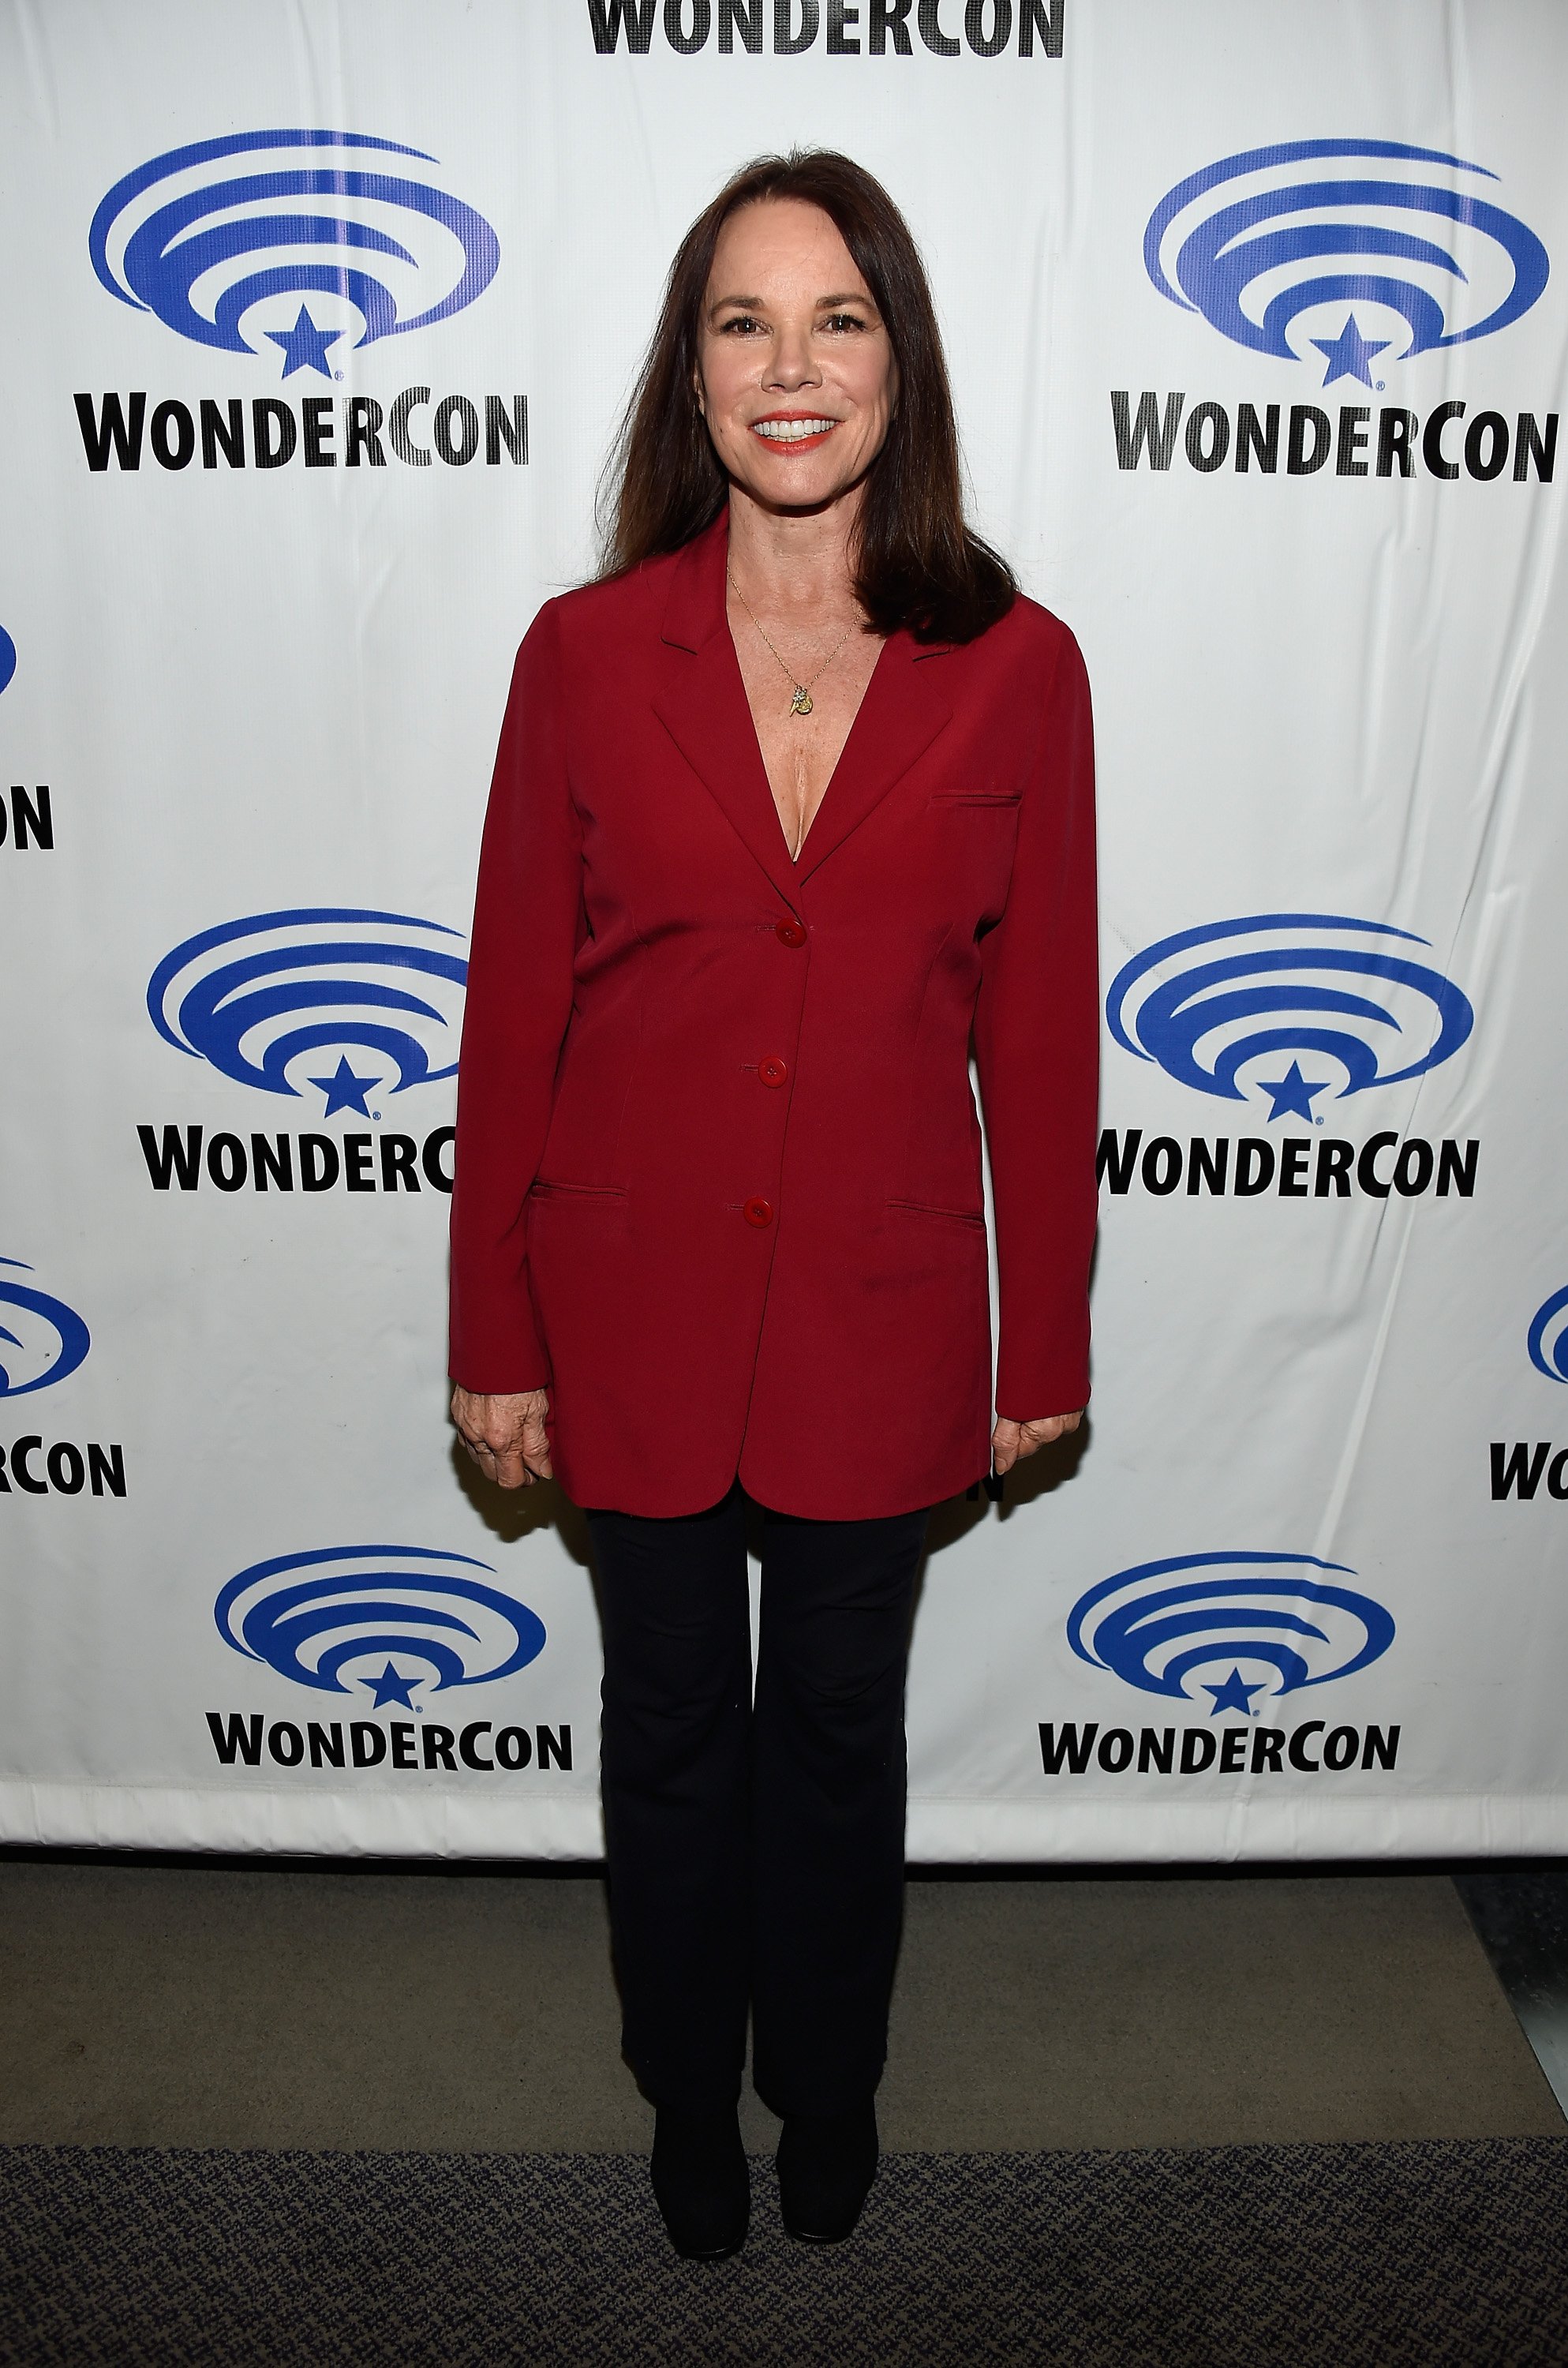 Barbara Hershey at WonderCon 2016, Los Angeles on March 25, 2016. | Source: Getty Images